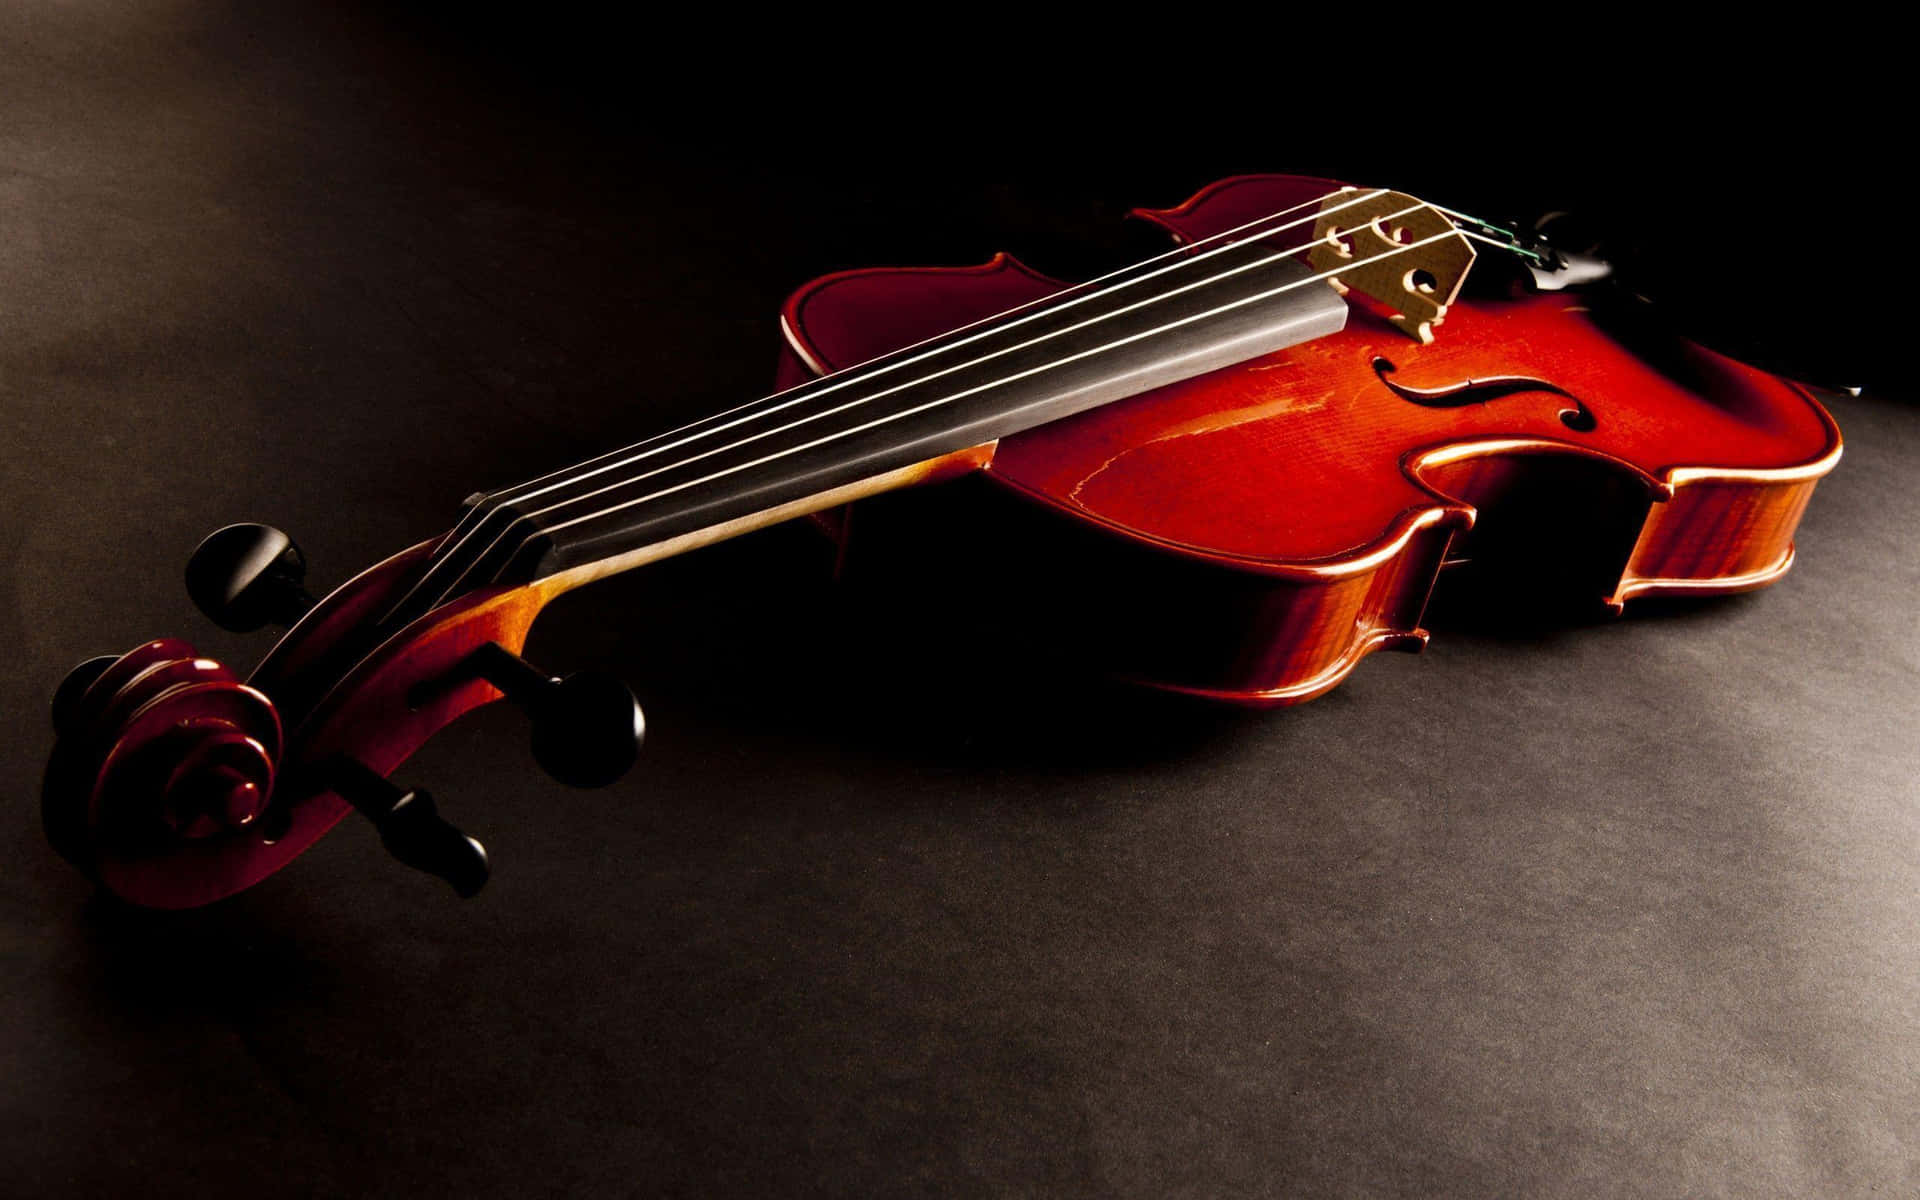 An artist performing at their utmost potential with a painted violin masterpiece. Wallpaper